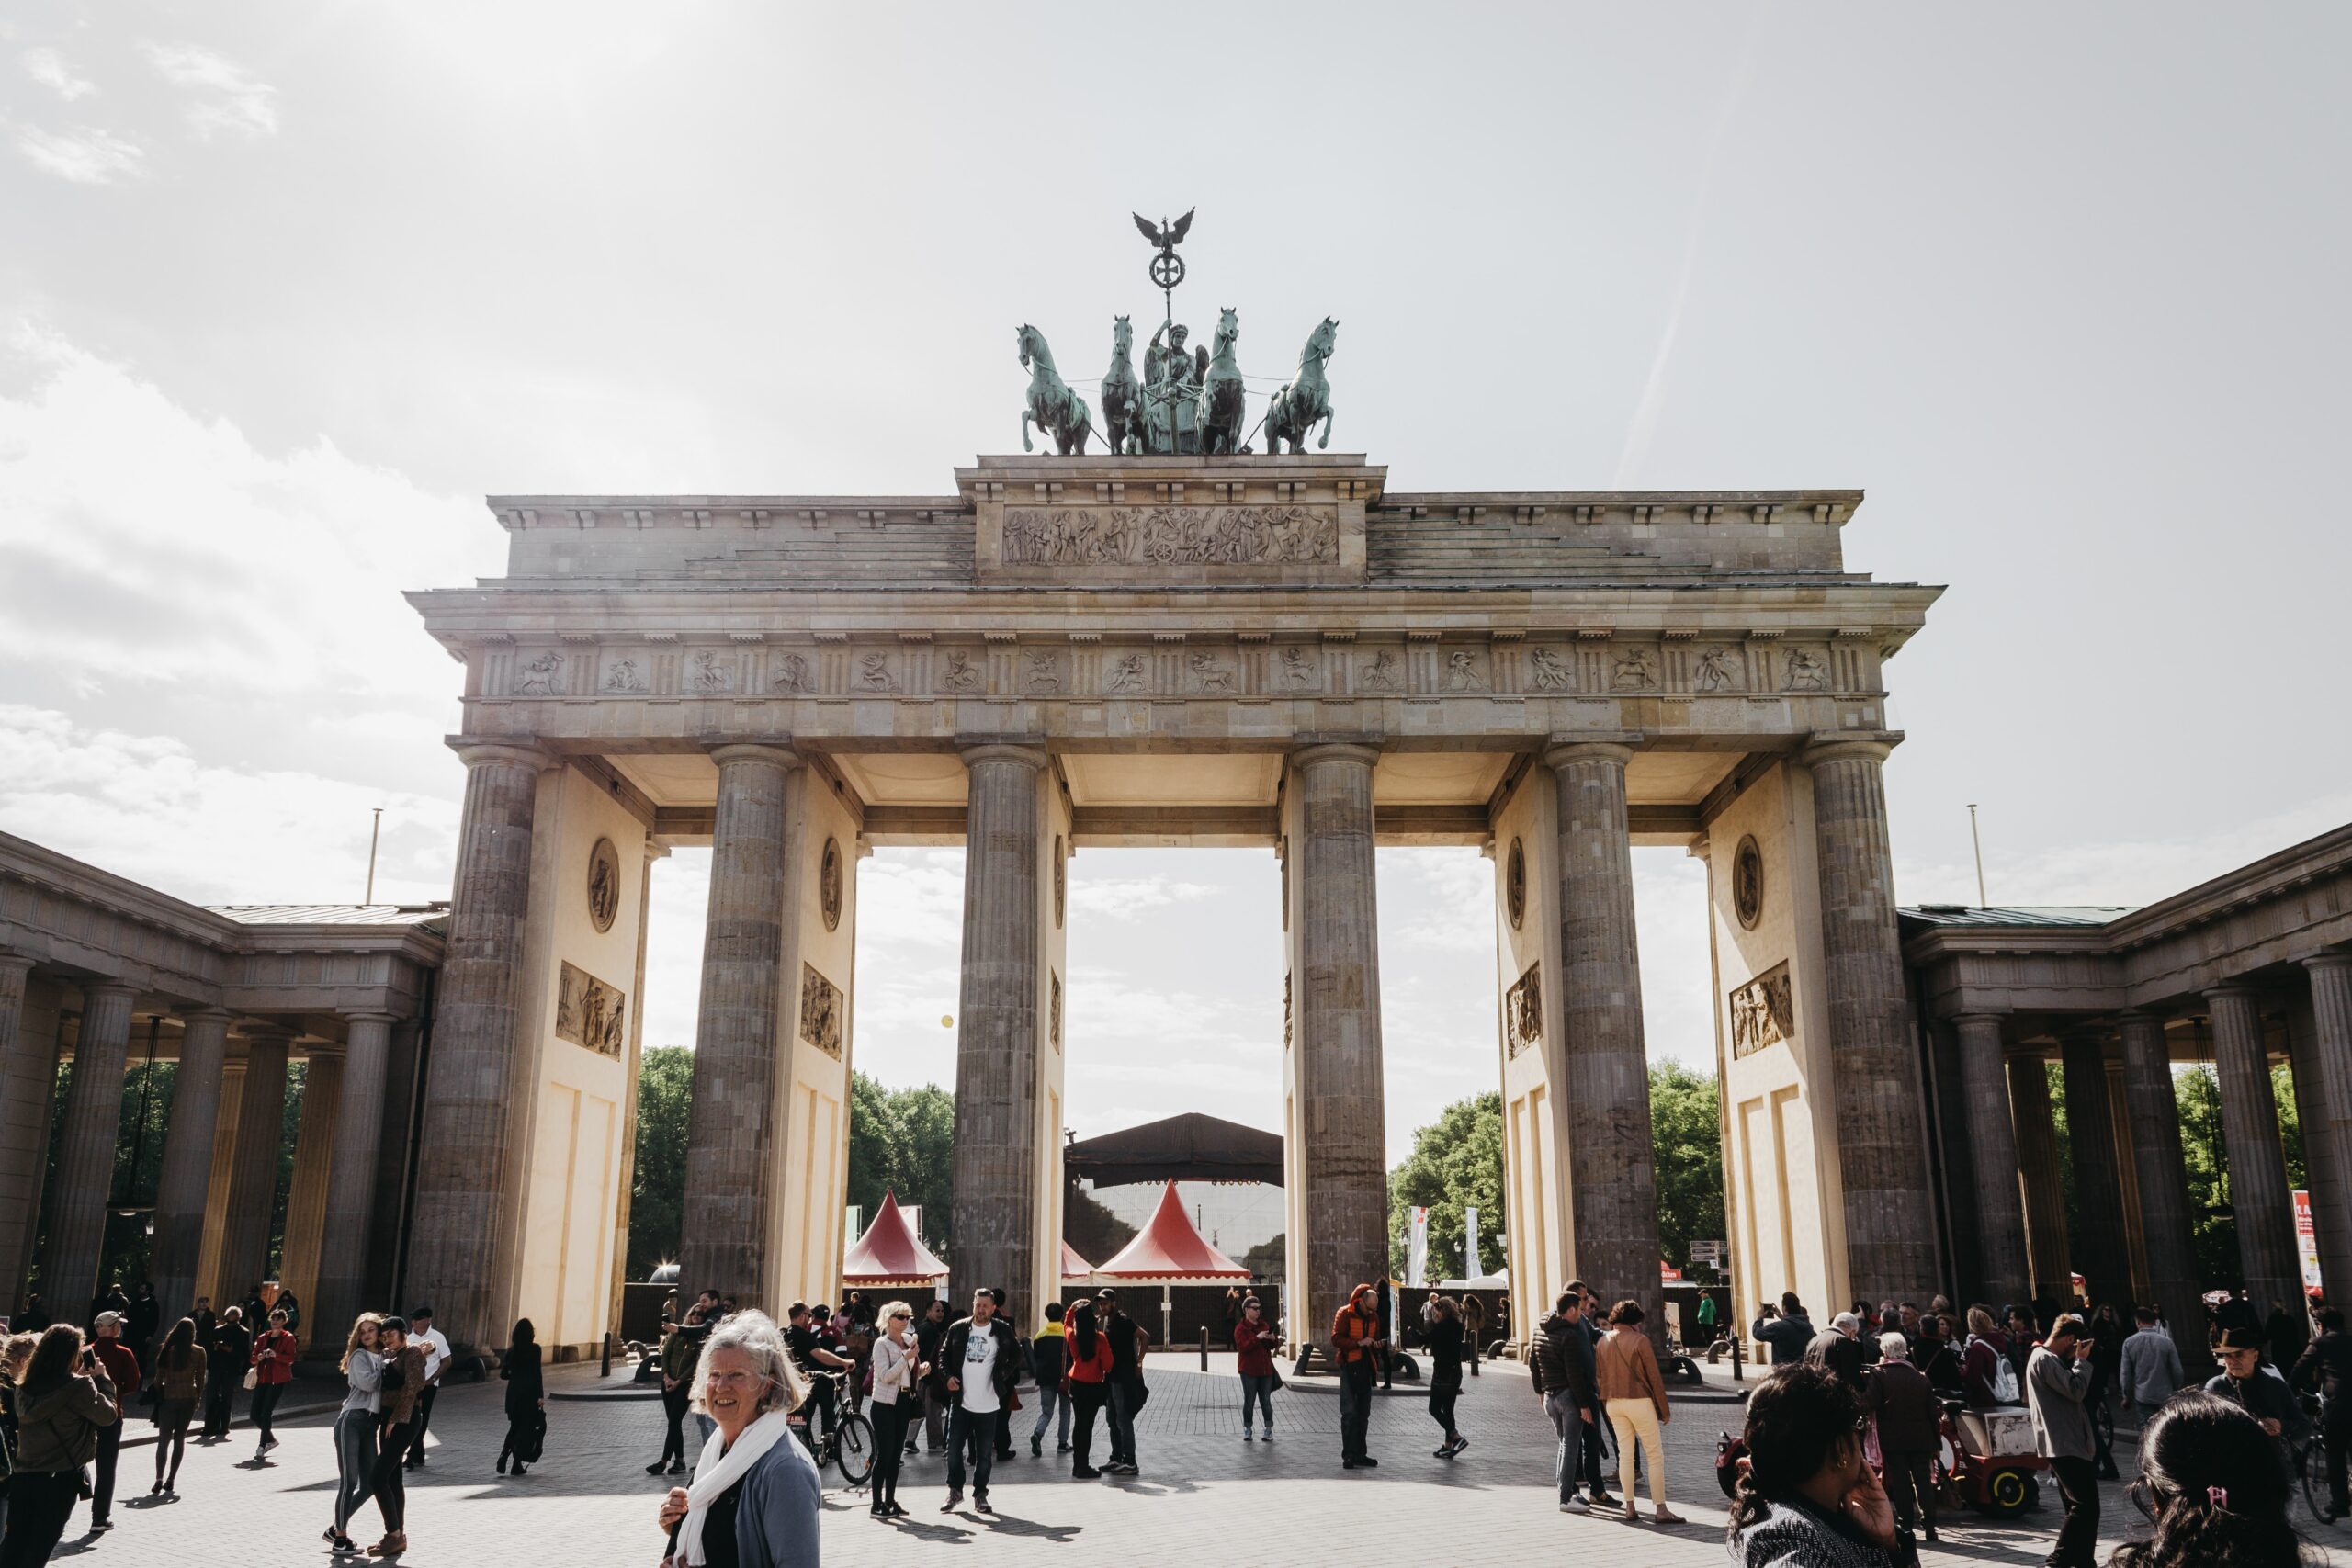 Student Life in Germany: A Journey of Discovery